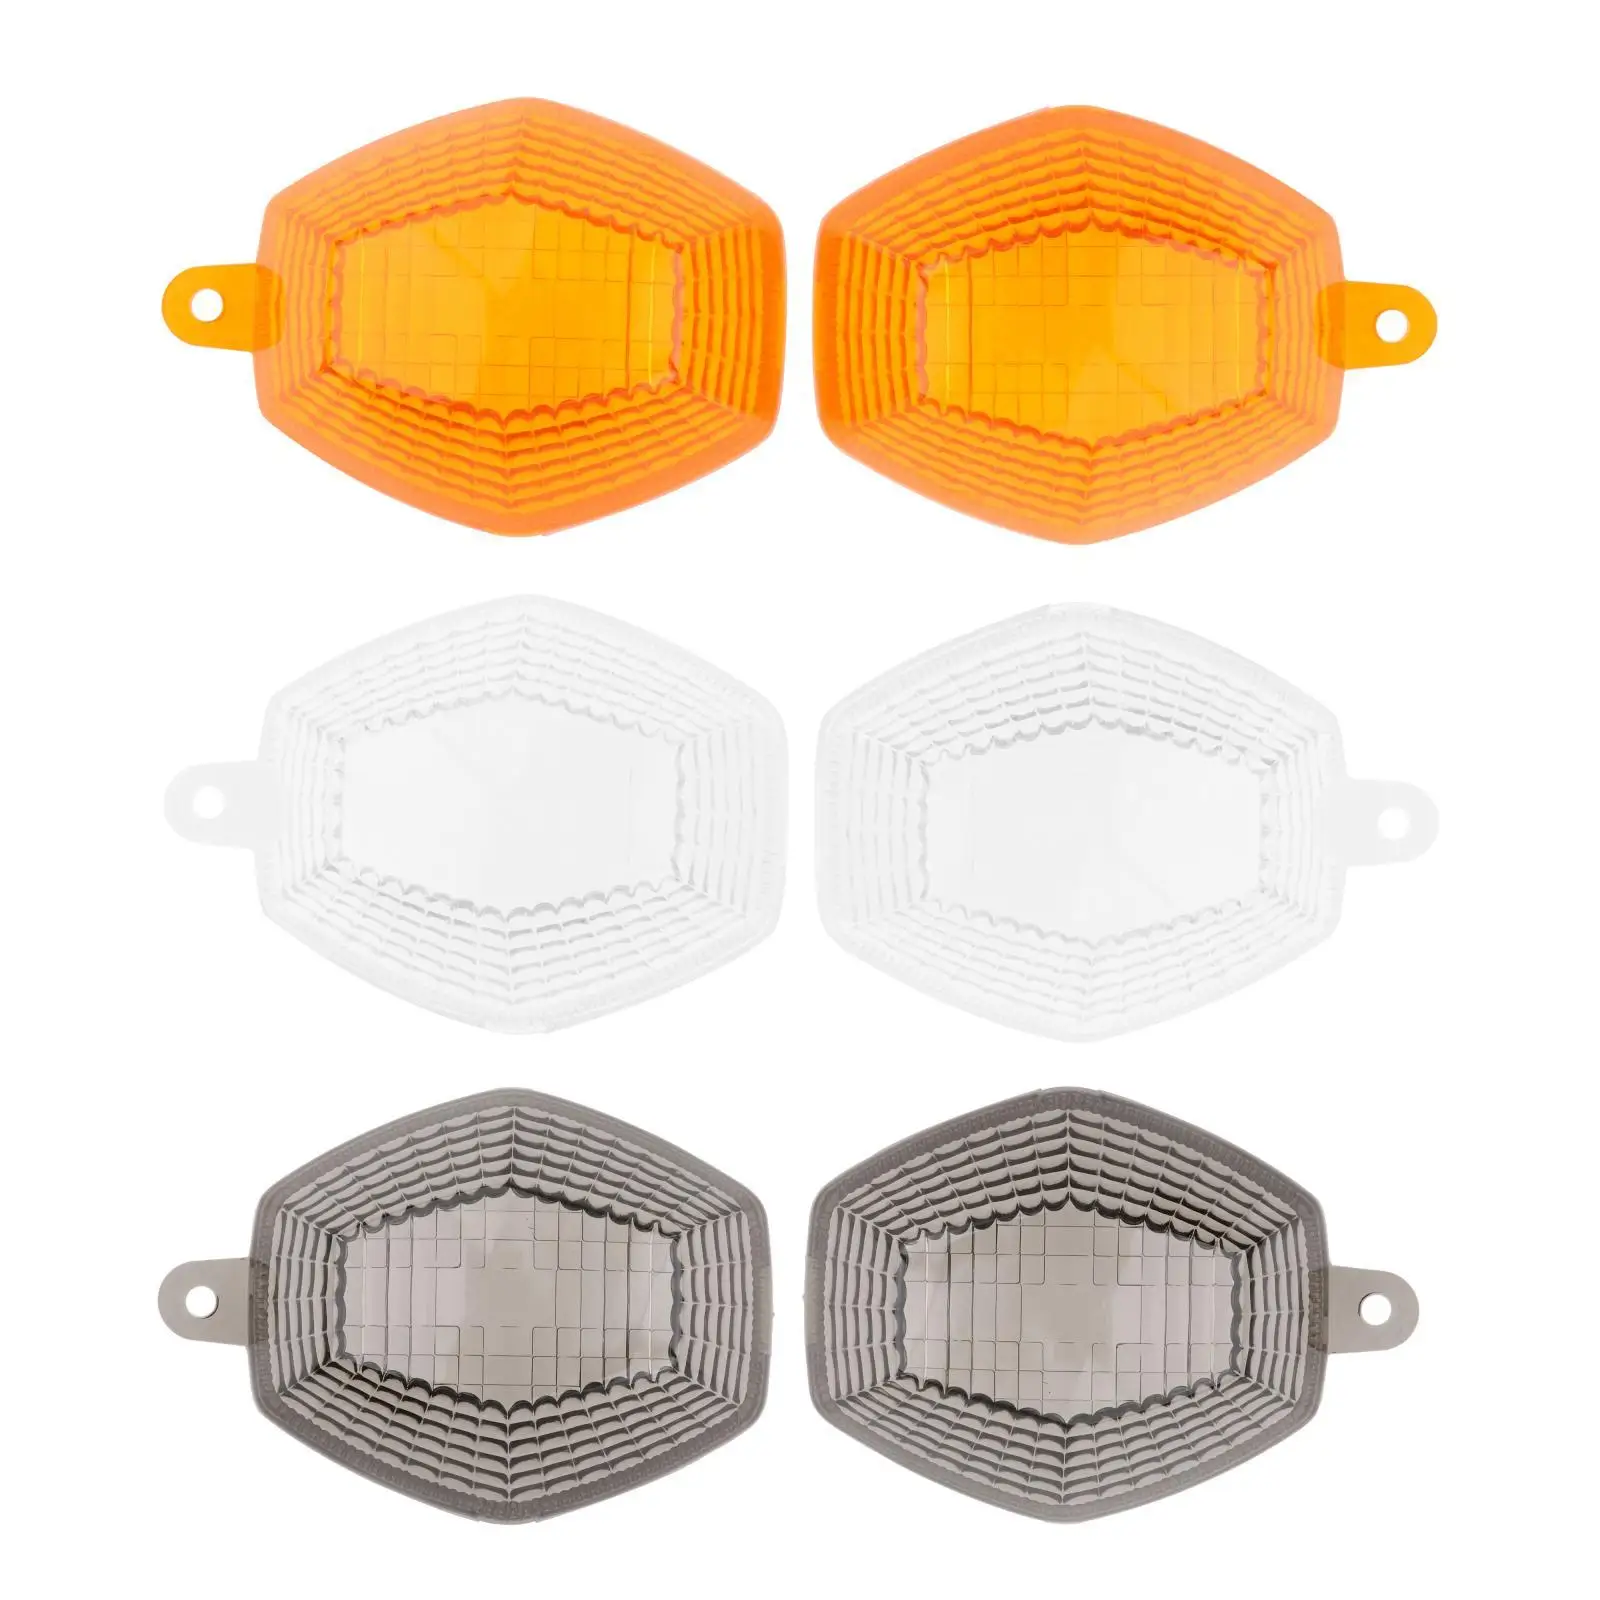  , Motorcycle Parts, Motorcycle Accessories, Indicator Lamp Cover, Fit for  Gsf 650 N/5-2010